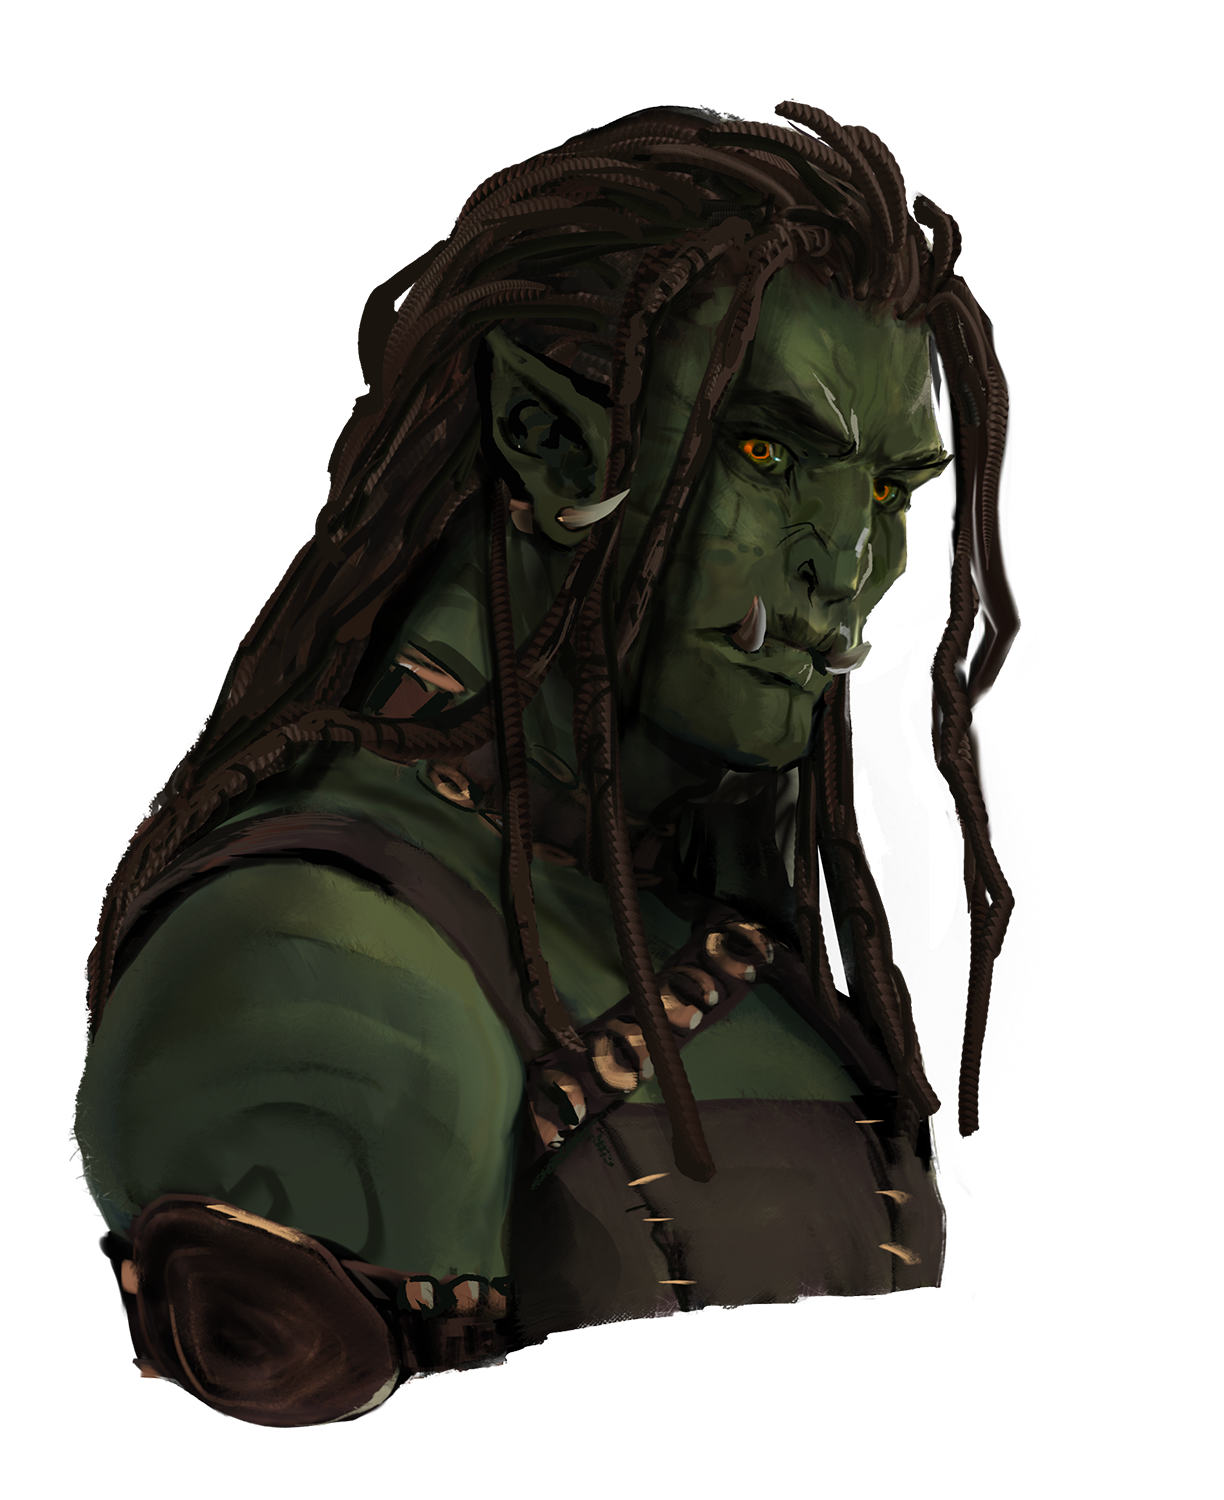 A half-orc man with dreadlocks and pointed ears, wearing leather armor.